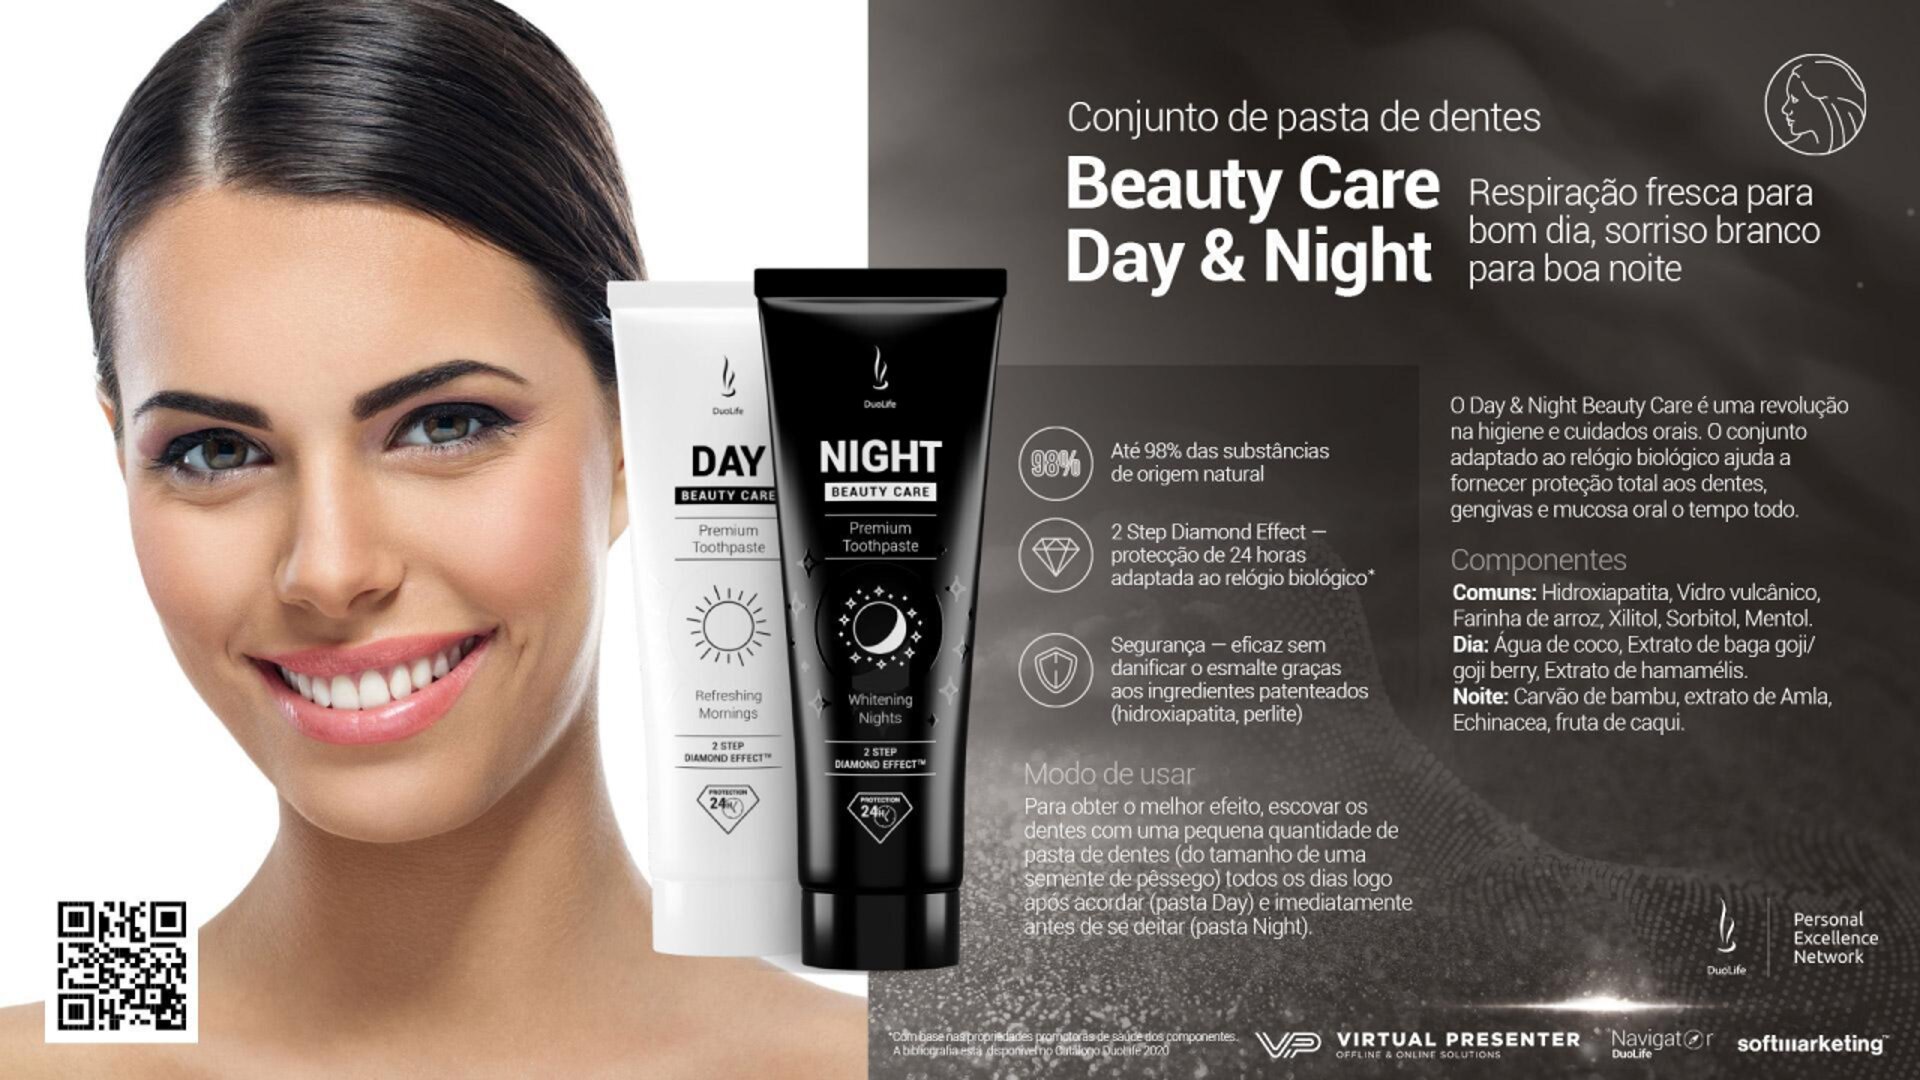 Beauty Care Day & Night